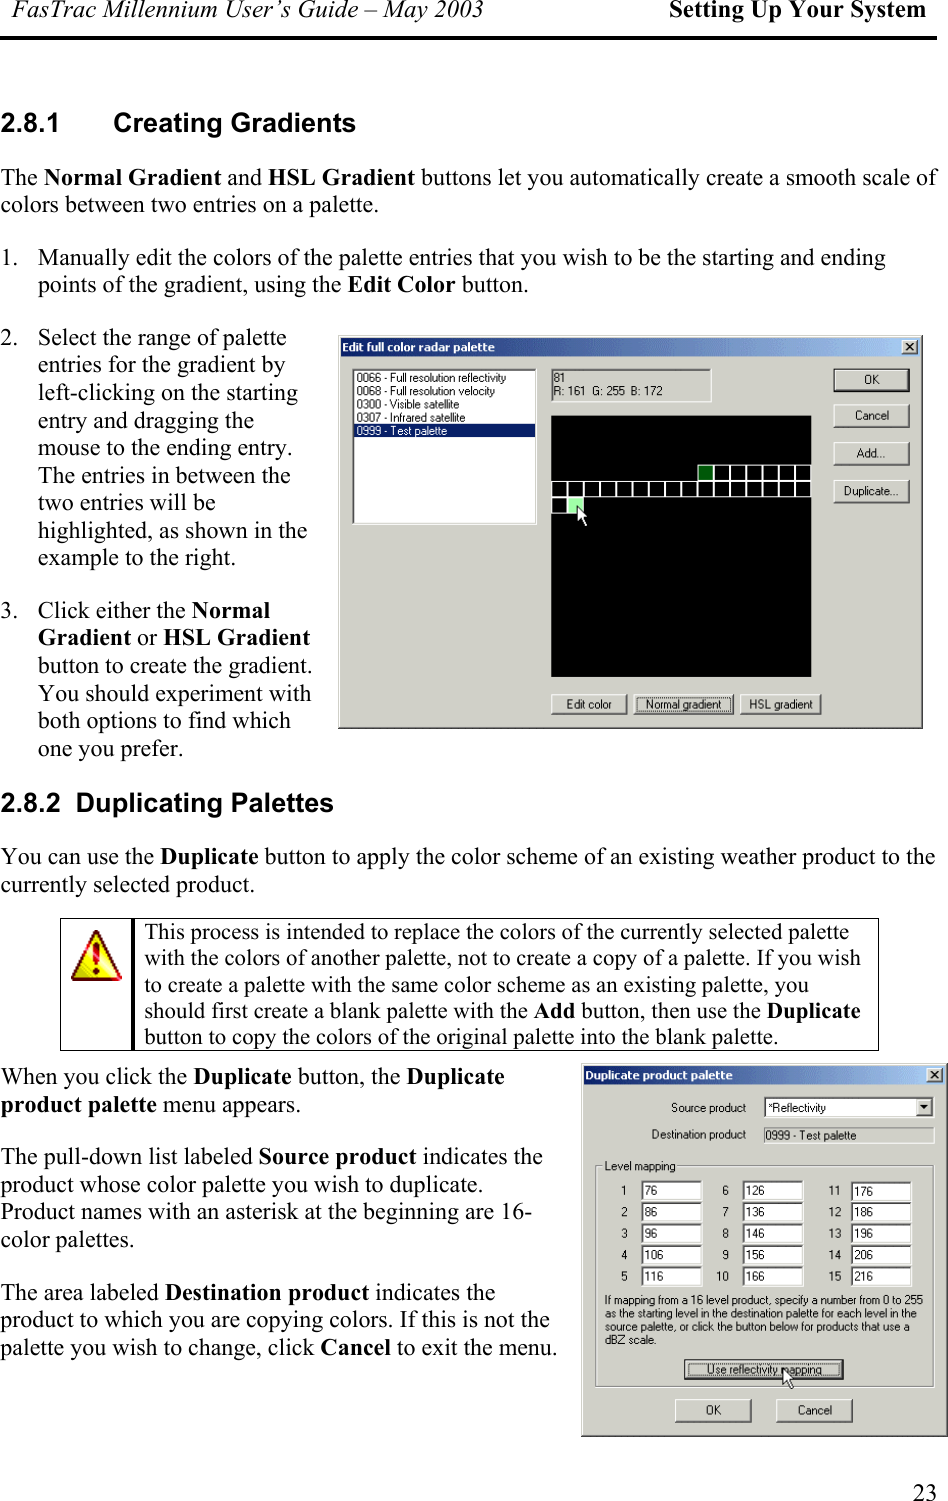 FasTrac Millennium User’s Guide – May 2003 Setting Up Your System 2.8.1 Creating Gradients The Normal Gradient and HSL Gradient buttons let you automatically create a smooth scale of colors between two entries on a palette. 1.  Manually edit the colors of the palette entries that you wish to be the starting and ending points of the gradient, using the Edit Color button. 2.  Select the range of palette entries for the gradient by left-clicking on the starting entry and dragging the mouse to the ending entry. The entries in between the two entries will be highlighted, as shown in the example to the right. 3.  Click either the Normal Gradient or HSL Gradient button to create the gradient. You should experiment with both options to find which one you prefer. 2.8.2 Duplicating Palettes You can use the Duplicate button to apply the color scheme of an existing weather product to the currently selected product.   This process is intended to replace the colors of the currently selected palette with the colors of another palette, not to create a copy of a palette. If you wish to create a palette with the same color scheme as an existing palette, you should first create a blank palette with the Add button, then use the Duplicate button to copy the colors of the original palette into the blank palette.   When you click the Duplicate button, the Duplicate product palette menu appears. The pull-down list labeled Source product indicates the product whose color palette you wish to duplicate. Product names with an asterisk at the beginning are 16-color palettes. The area labeled Destination product indicates the product to which you are copying colors. If this is not the palette you wish to change, click Cancel to exit the menu.  23 